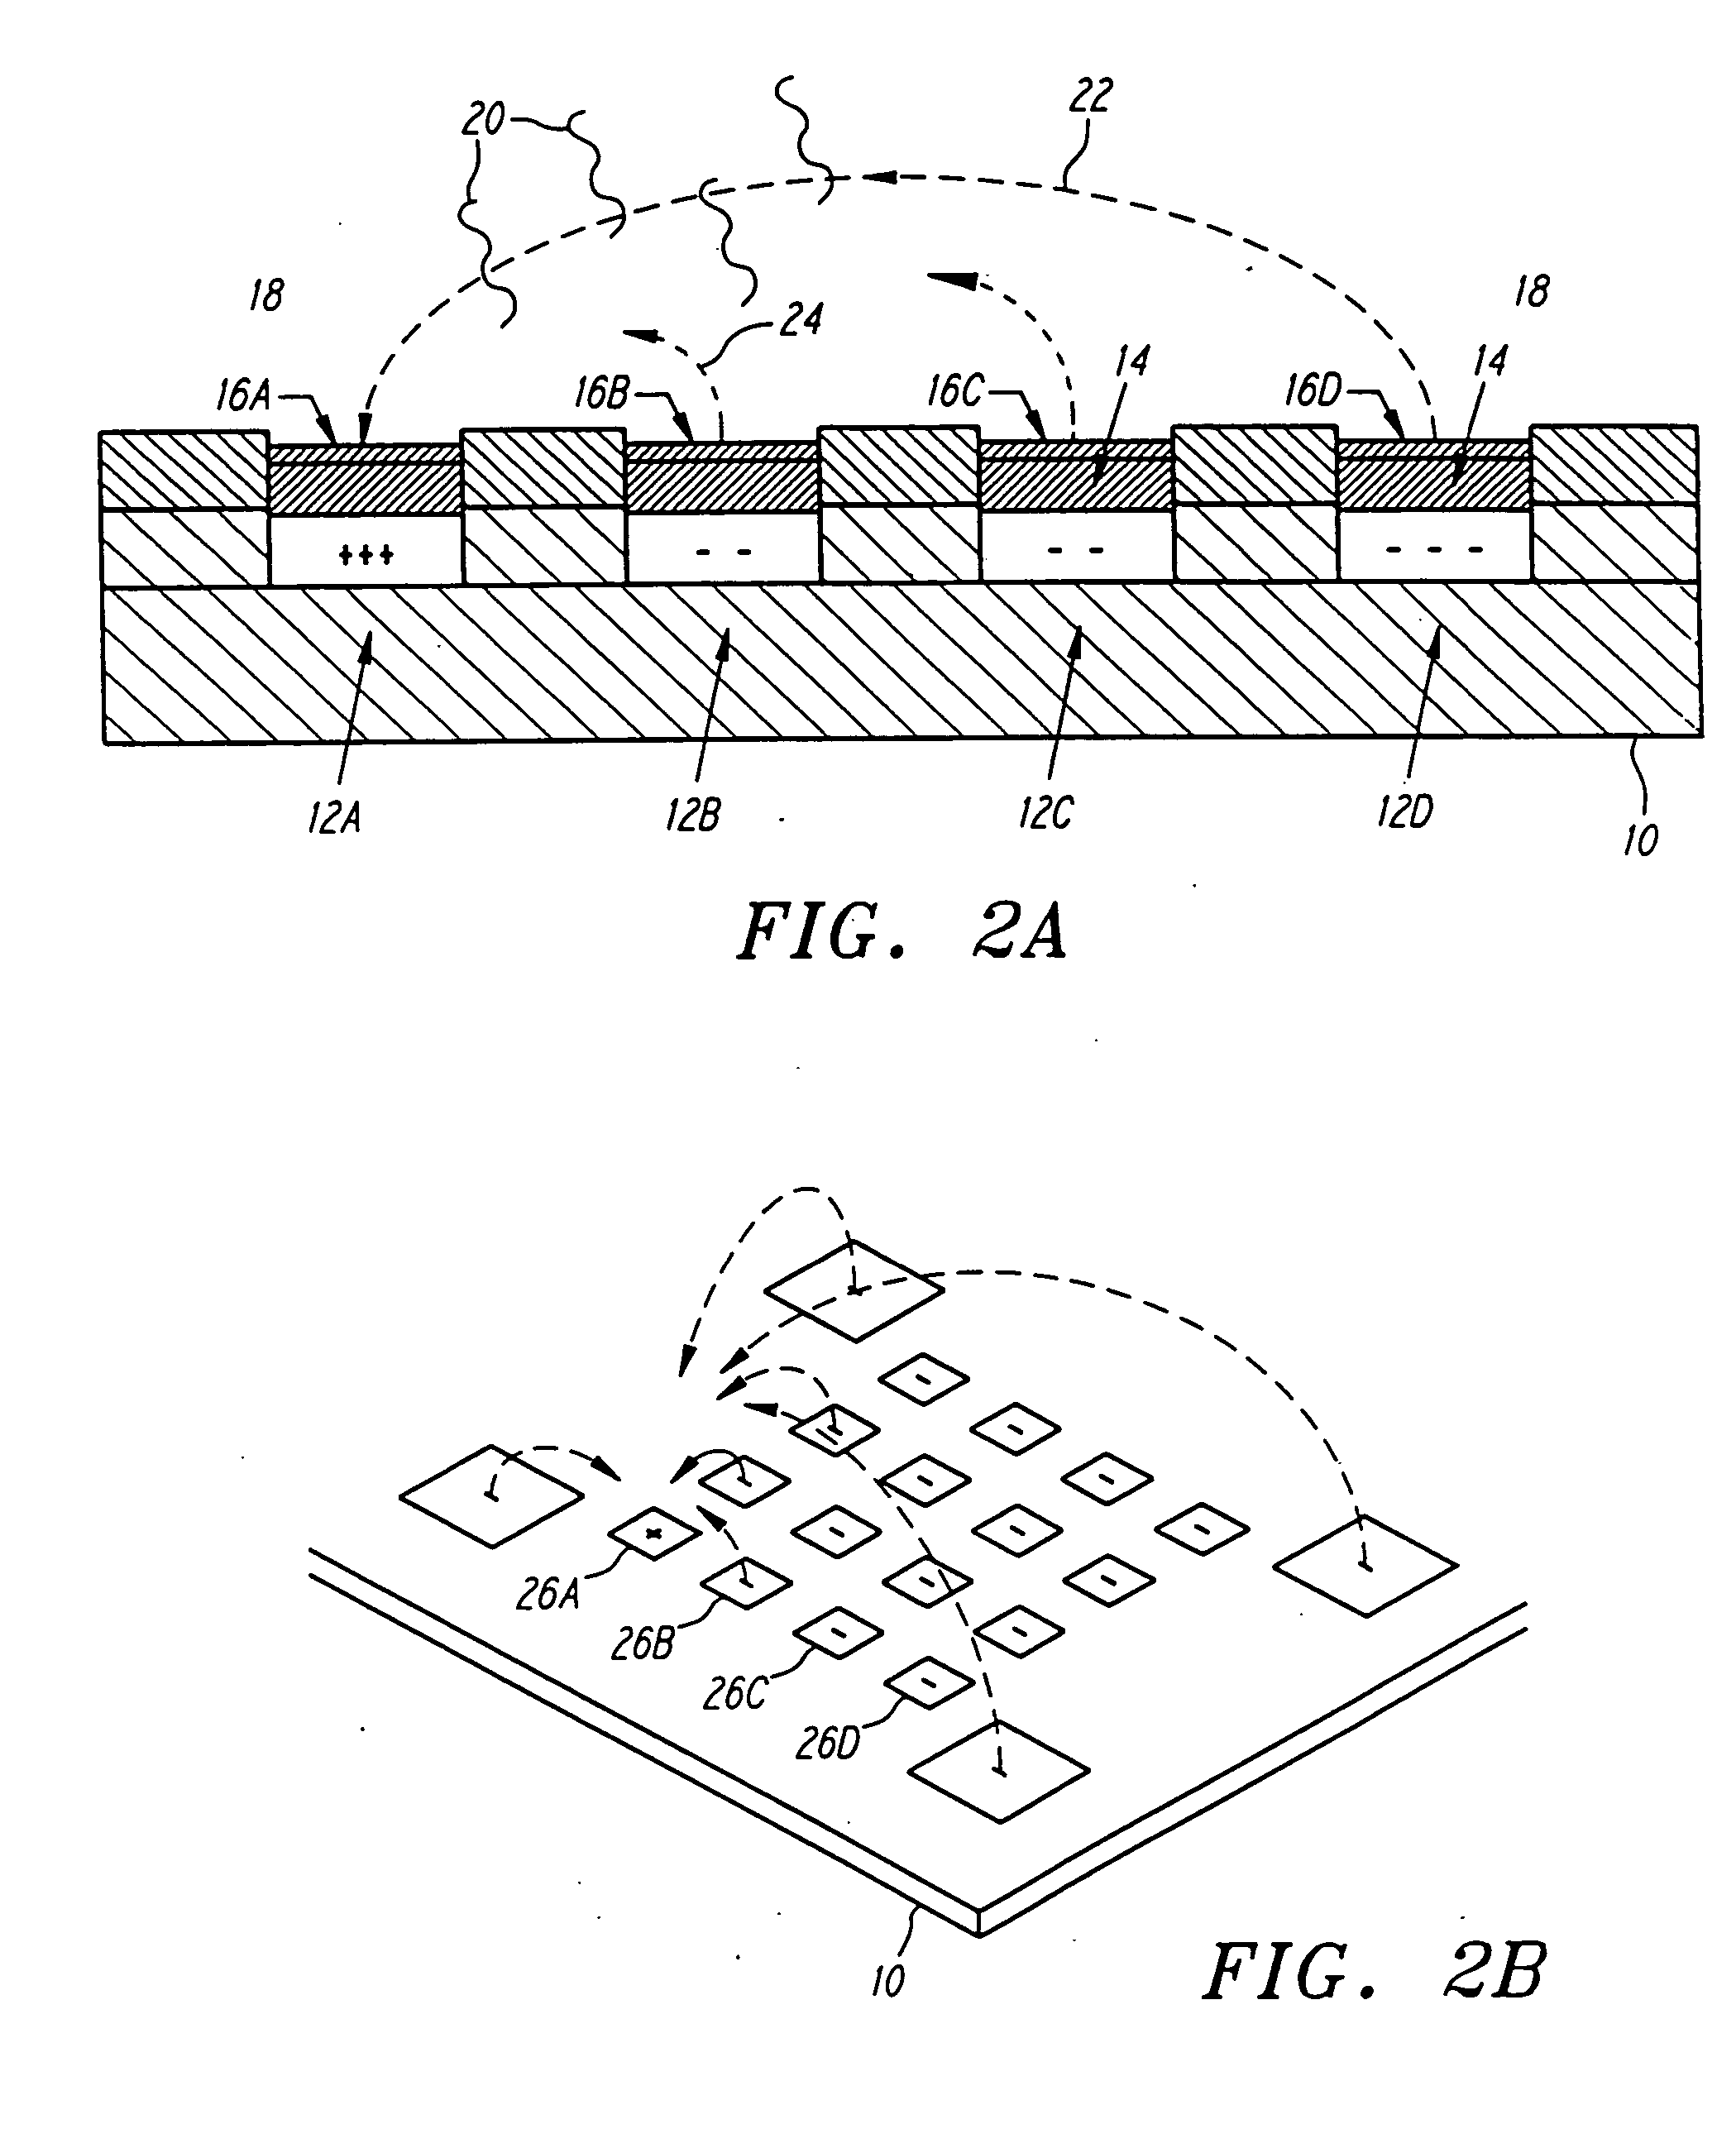 Apparatus for active programmable matrix devices